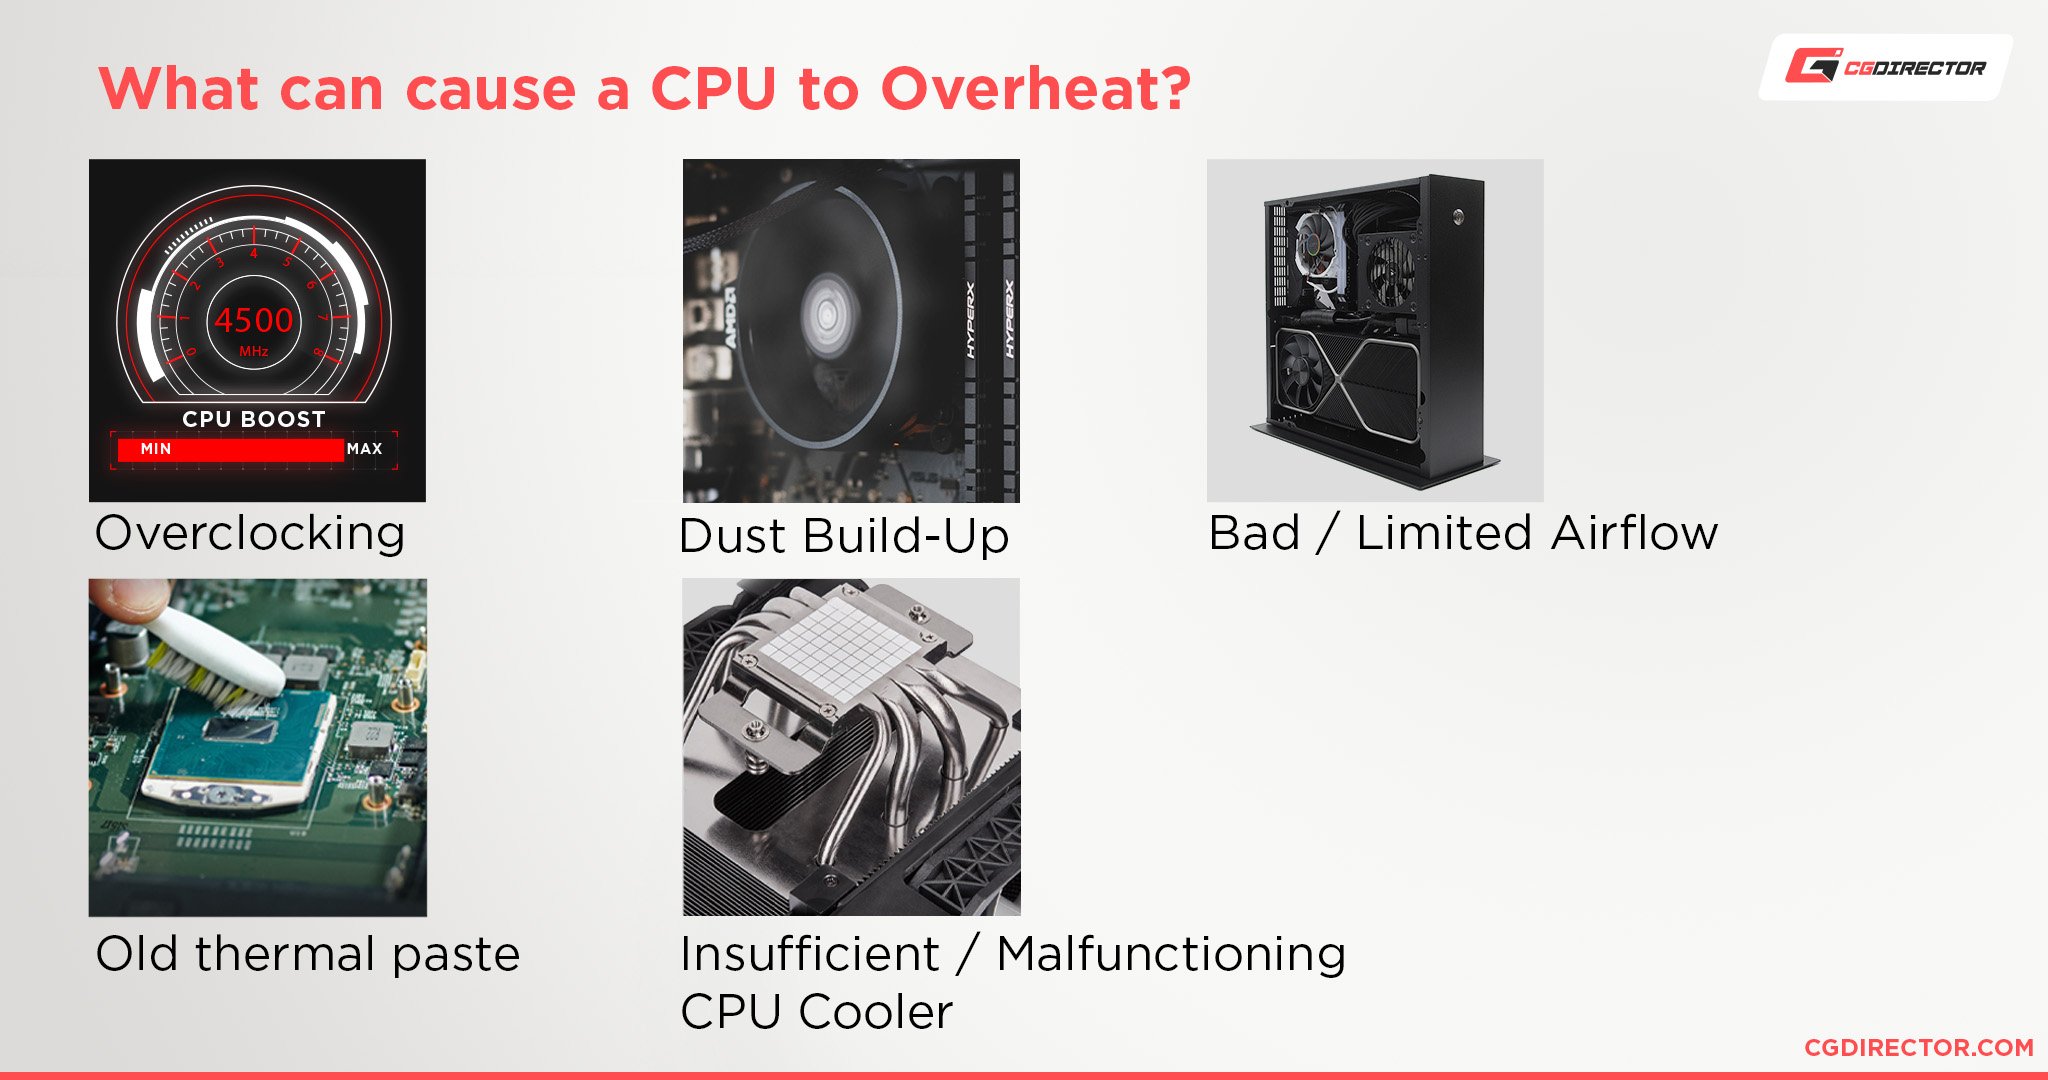 What can cause a CPU to Overheat